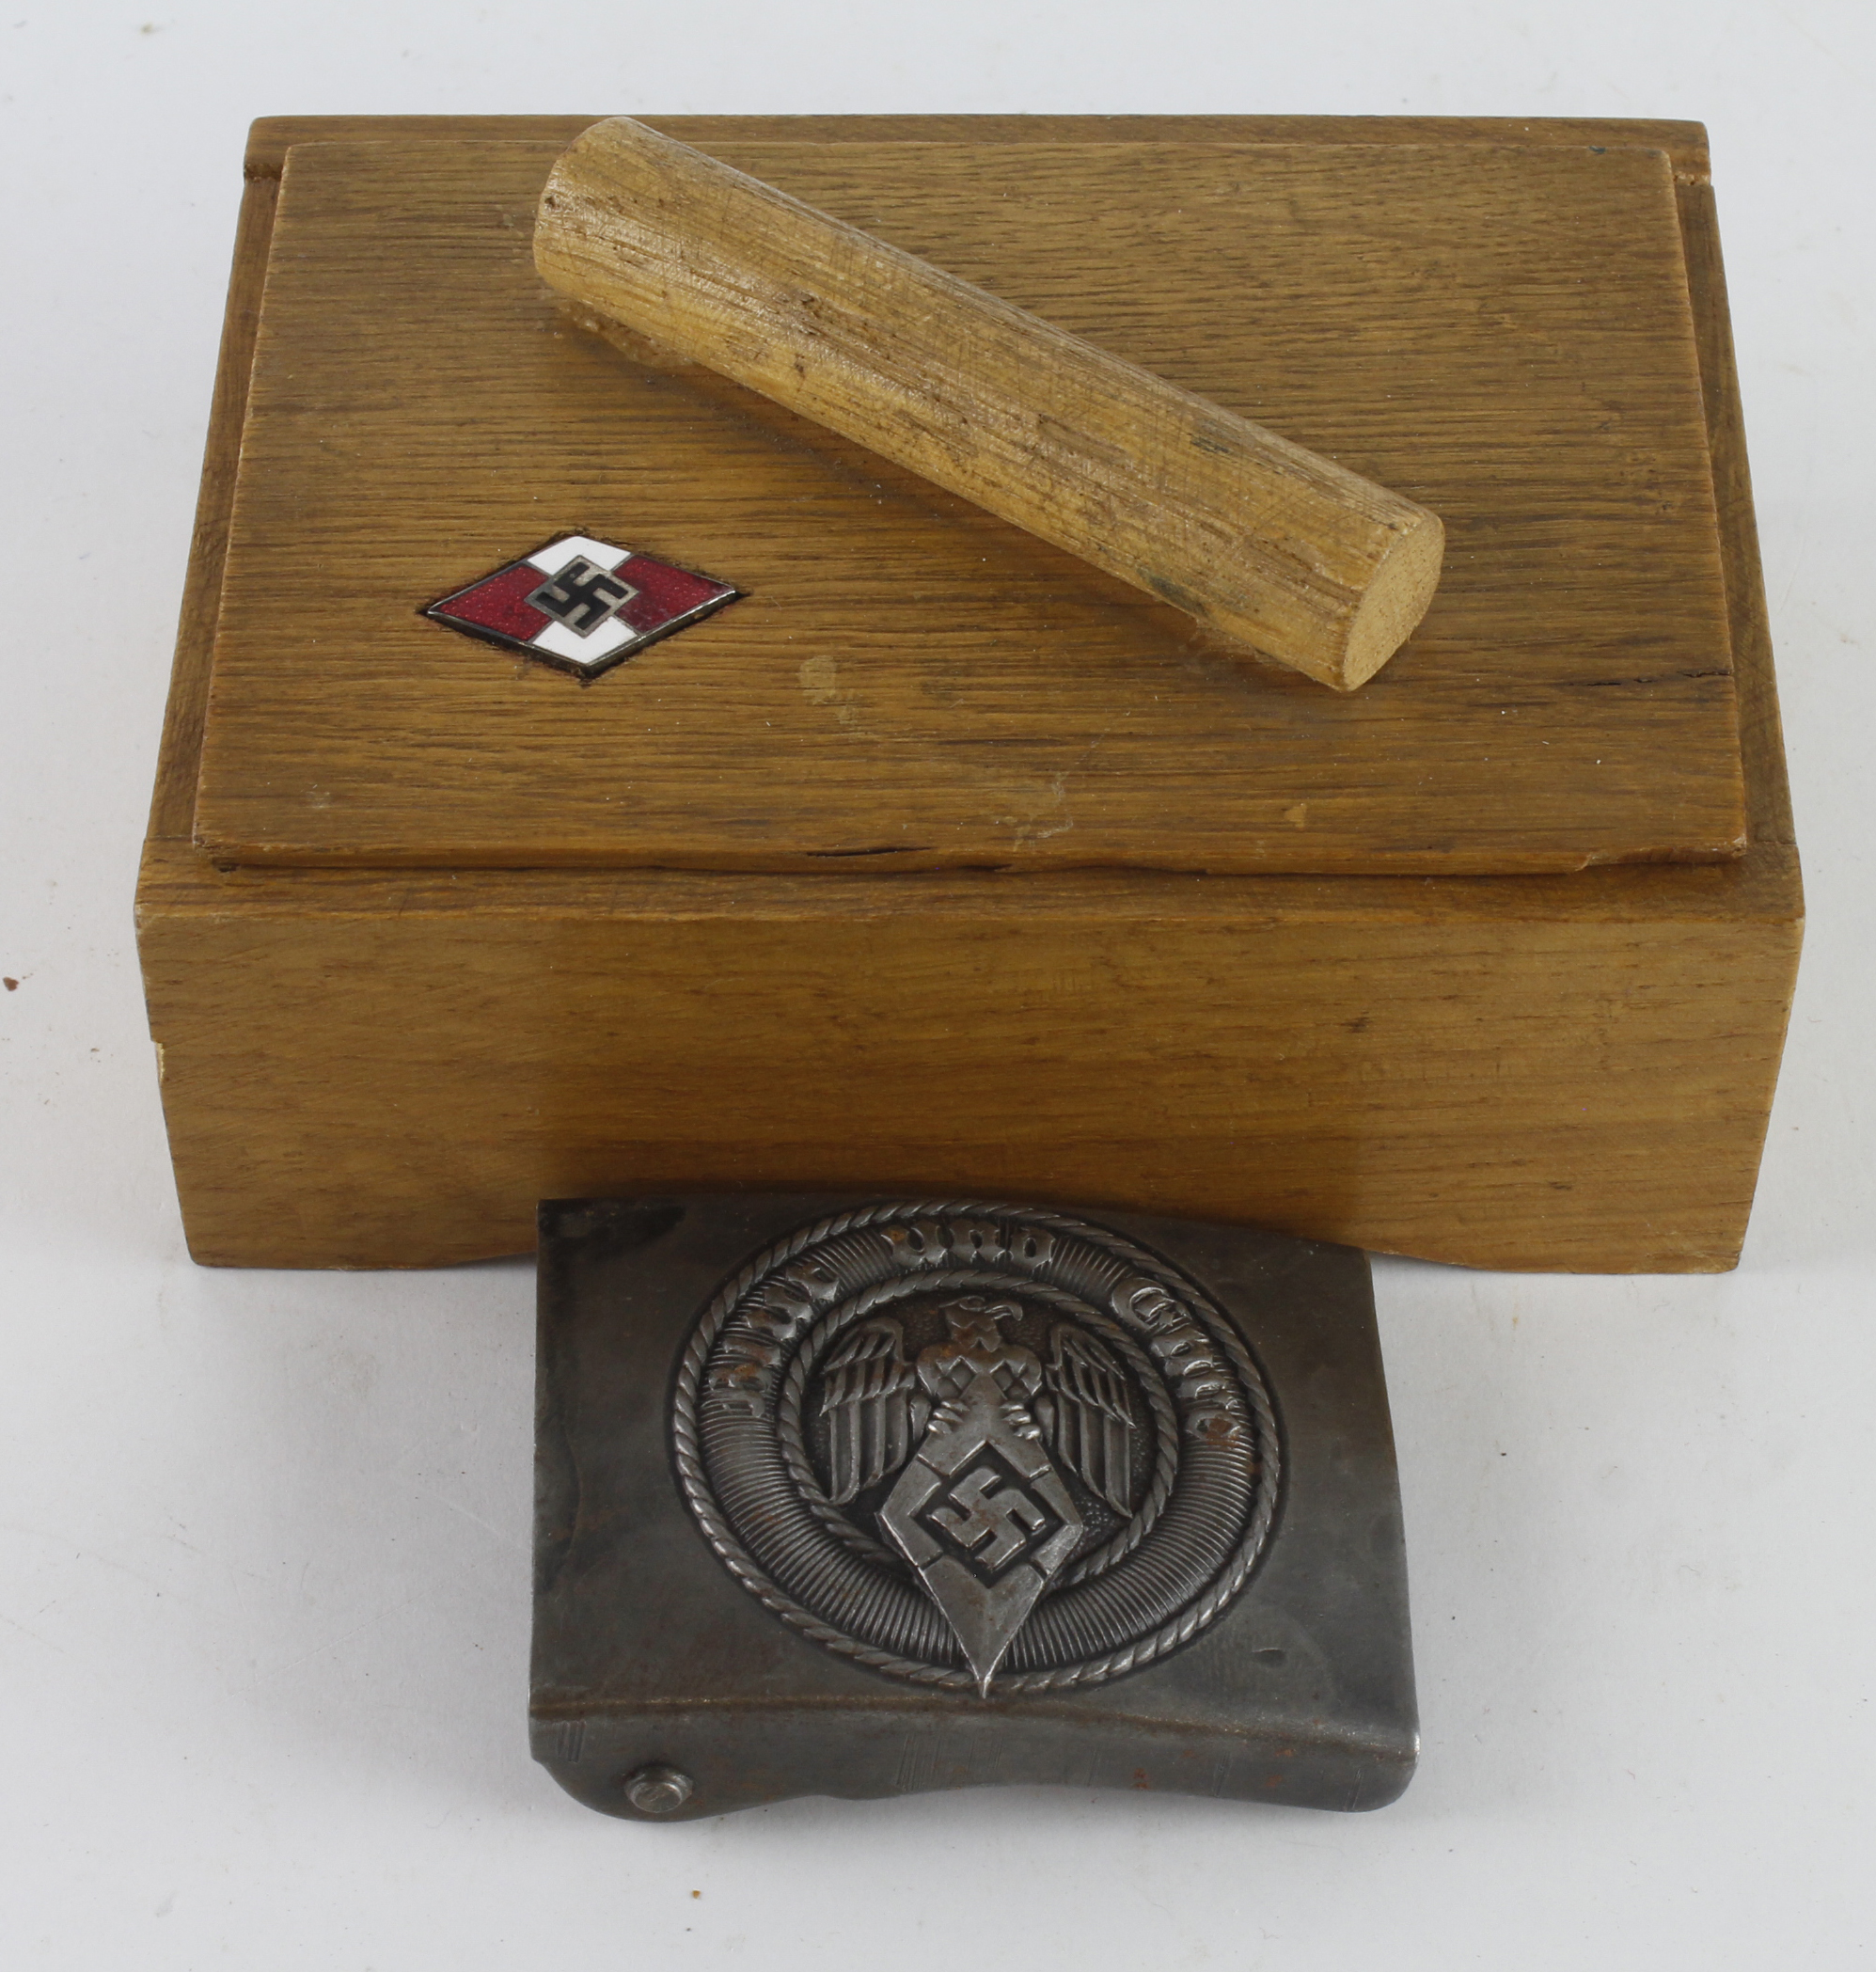 German HJ Hitler Youth a small wooden cigarette box containing an HJ belt buckle.